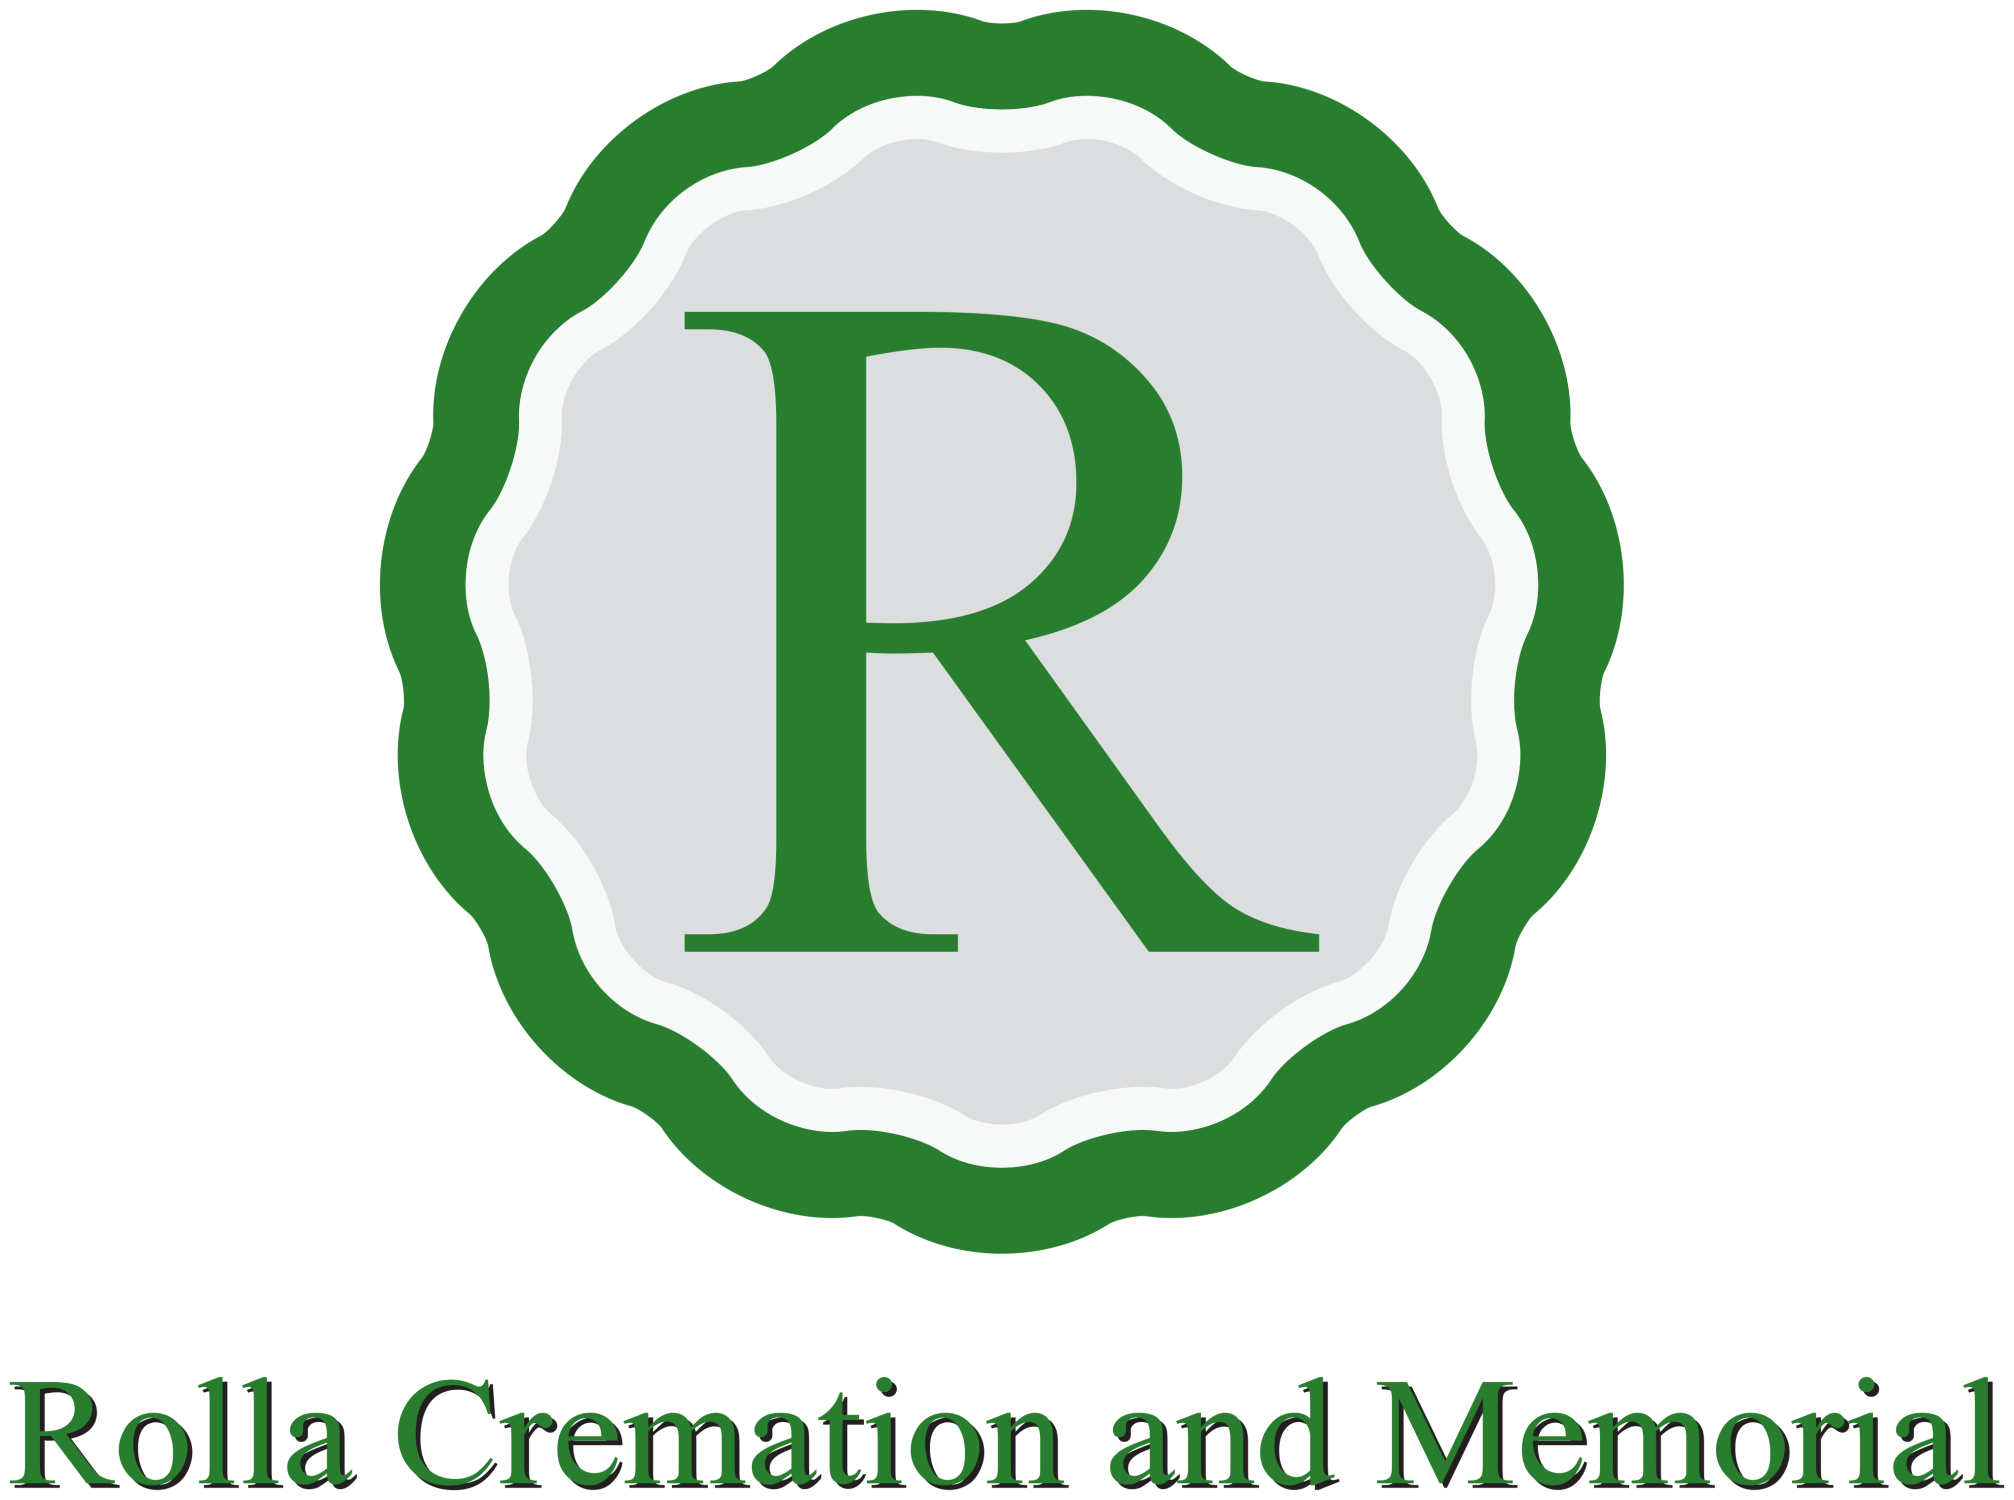 Rolla Logo - Rolla Cremation and Memorial | Rolla MO funeral home and cremation